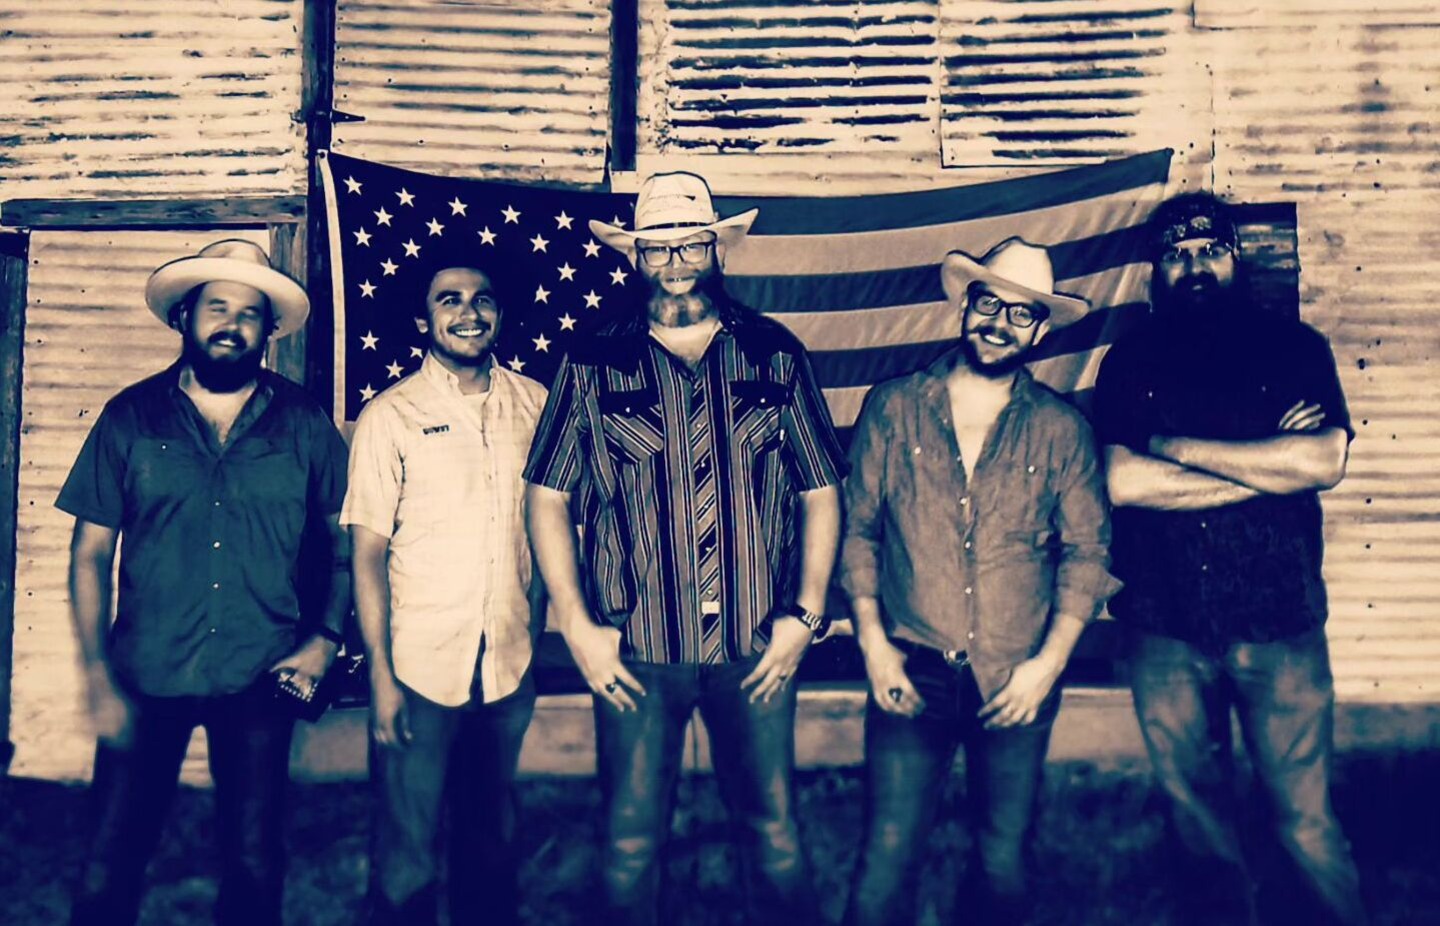 Band standing in front of an American flag